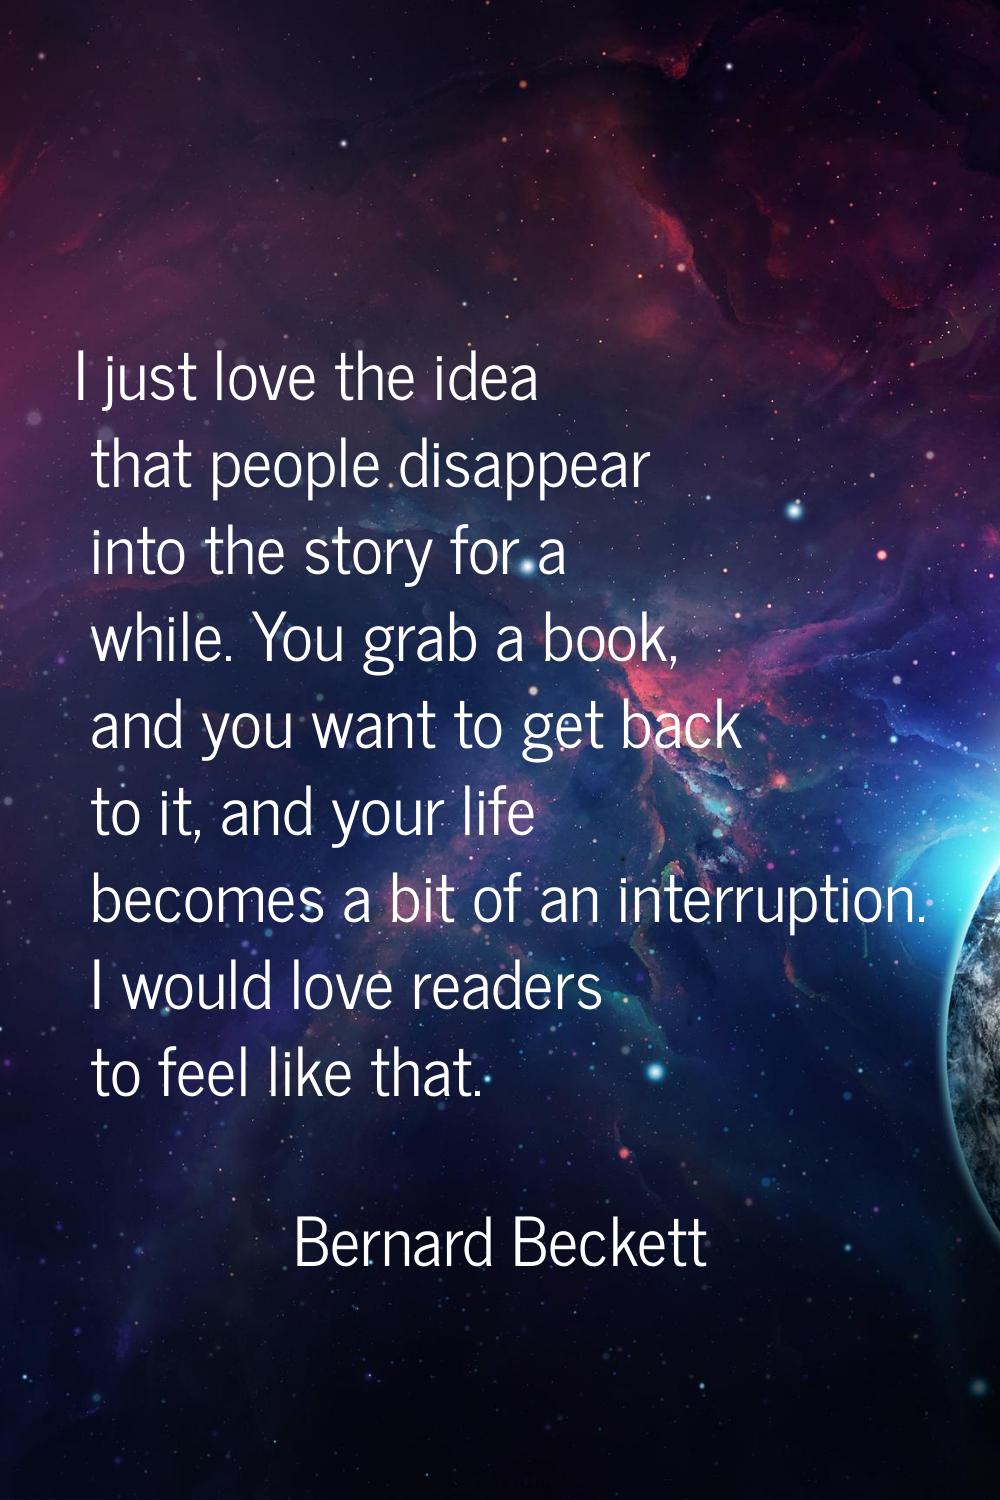 I just love the idea that people disappear into the story for a while. You grab a book, and you wan